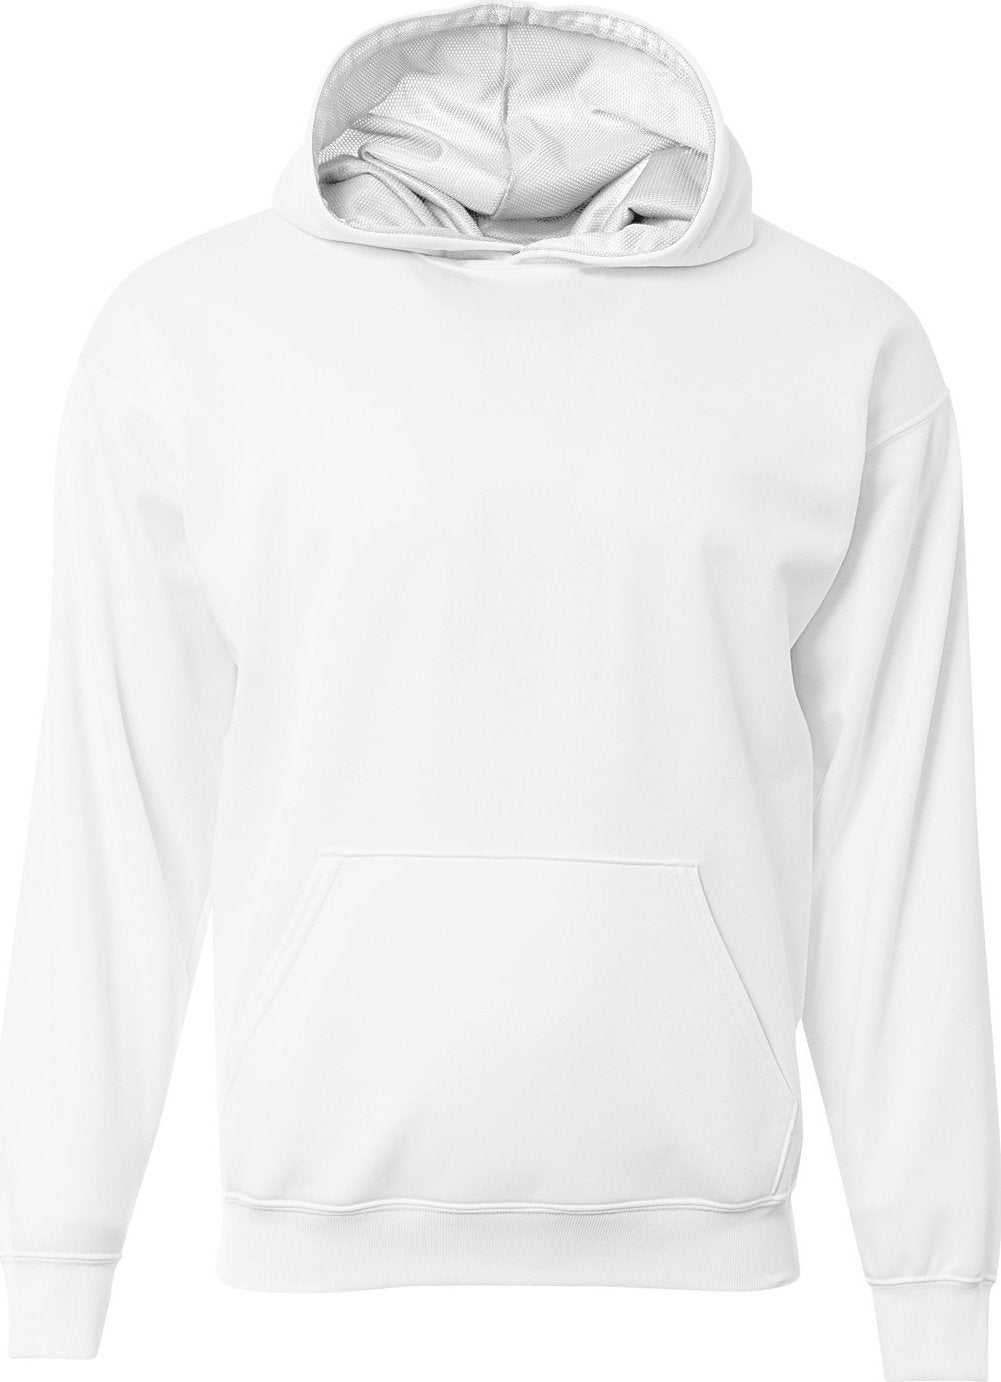 A4 NB4279 Youth Sprint Hooded Sweatshirt - WHITE - HIT a Double - 2